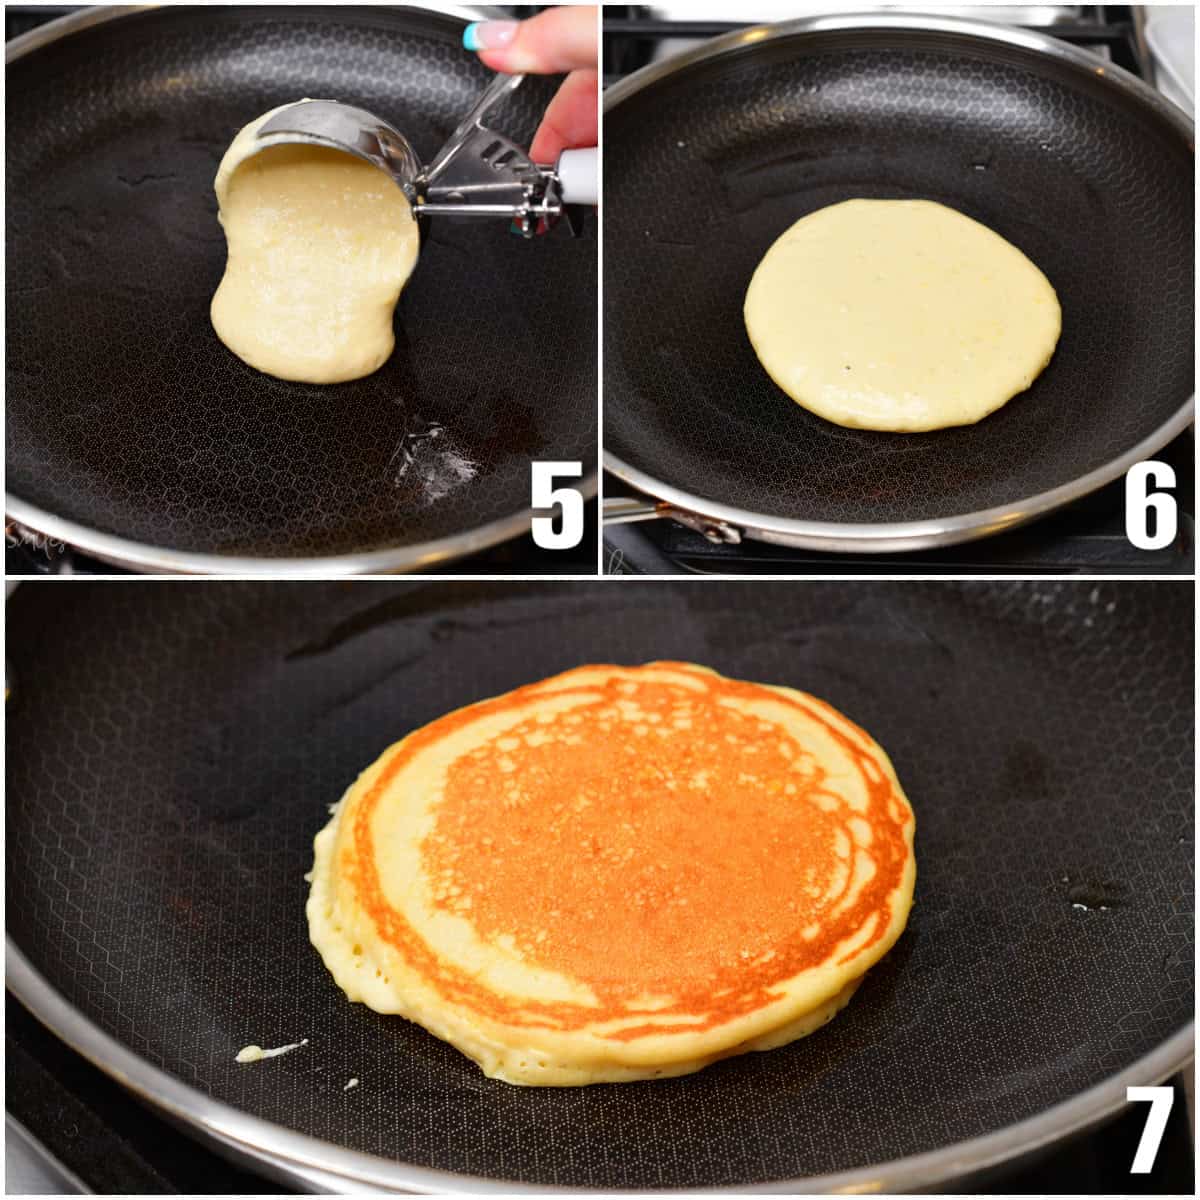 Collage of three images of scooping pancakes into a pan and cooking them.